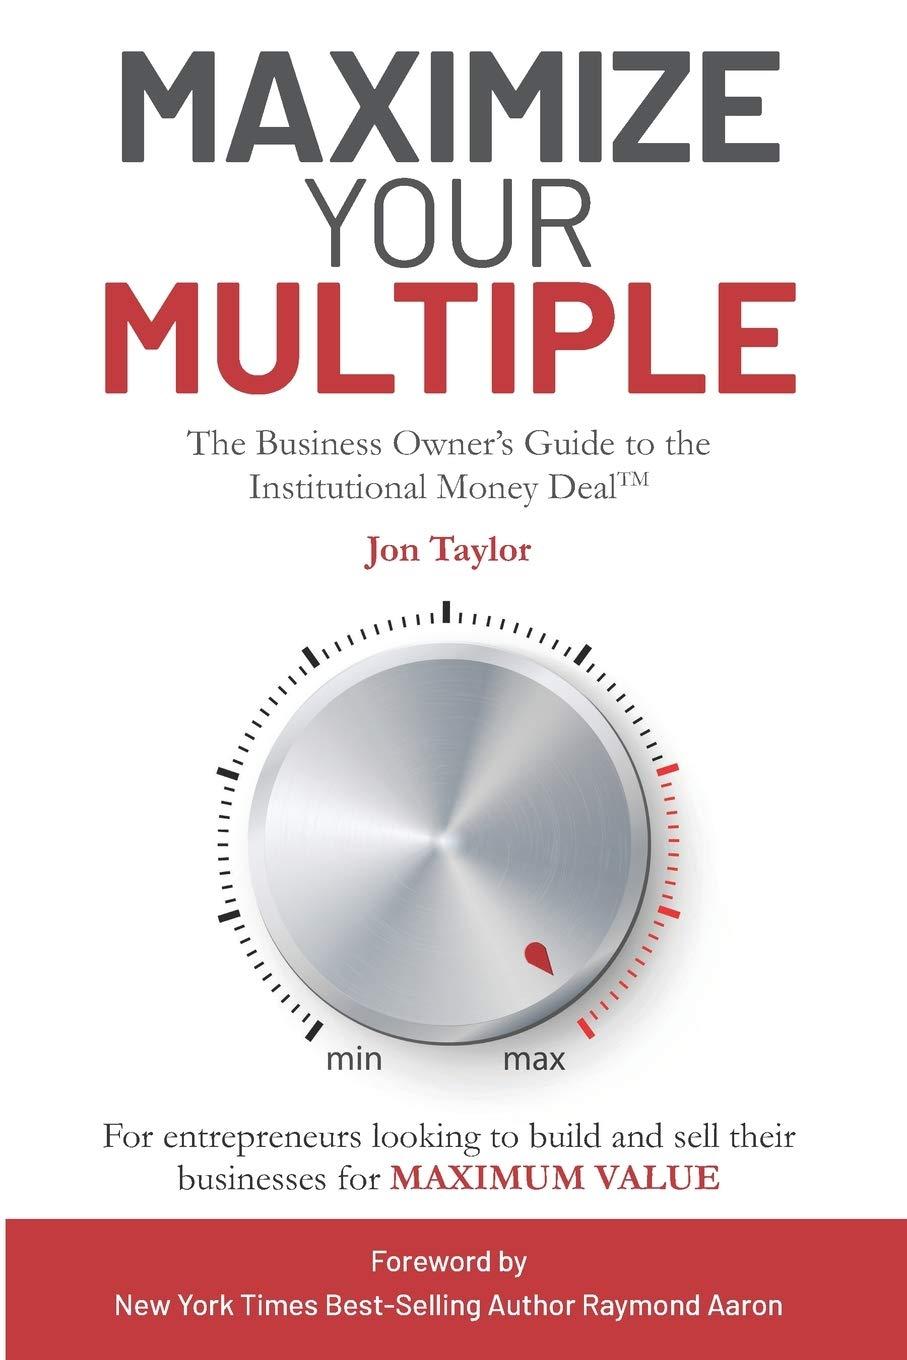 maximize your multiple the business owners guide to the institutional money deal for entrepreneurs looking to